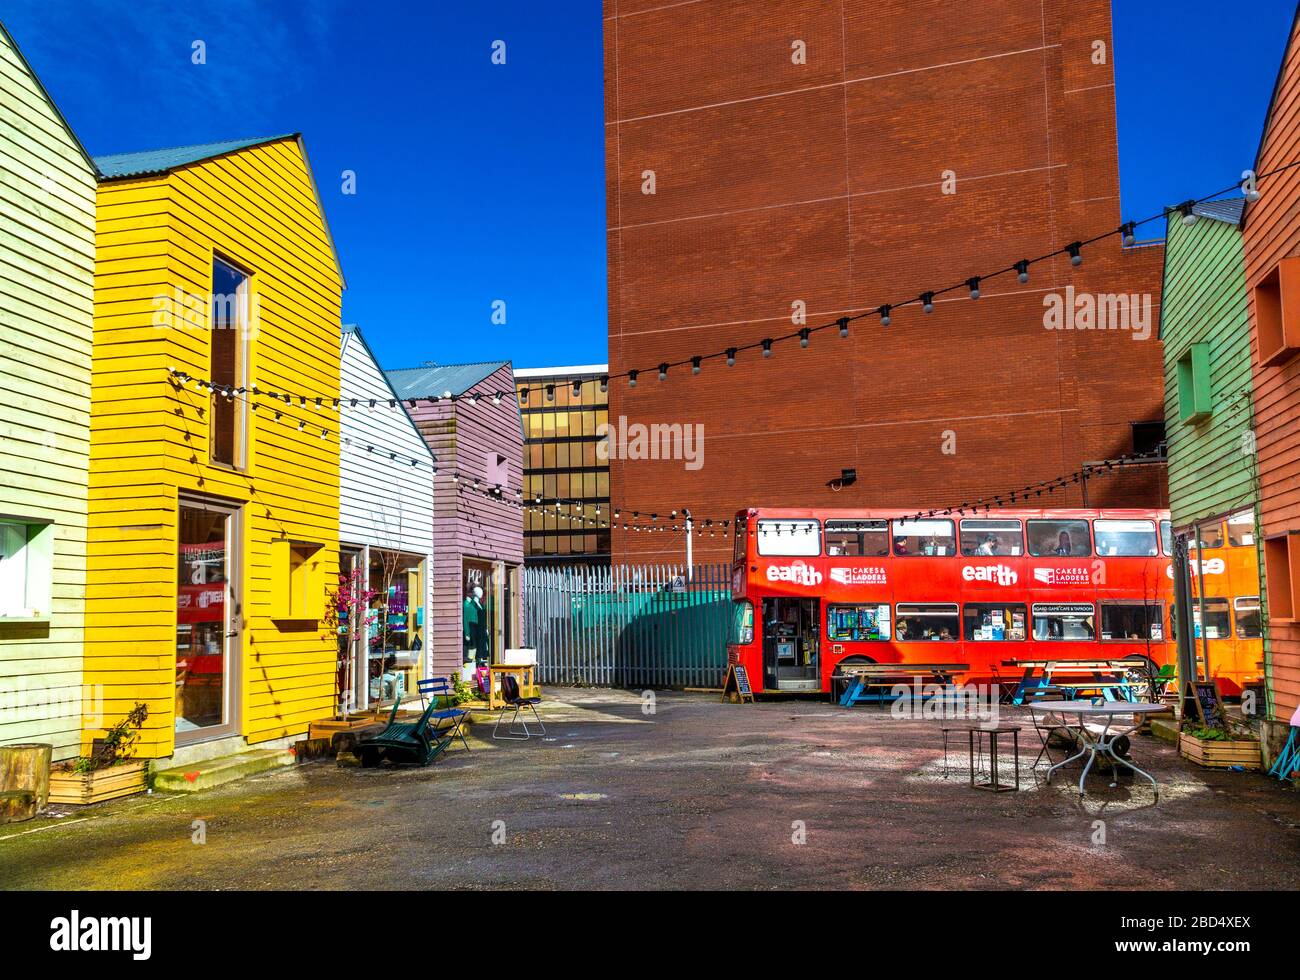 Blue House Yard and Cakes & Ladders boardgames double decker cafe bus in Wood Green, London, UK Stock Photo